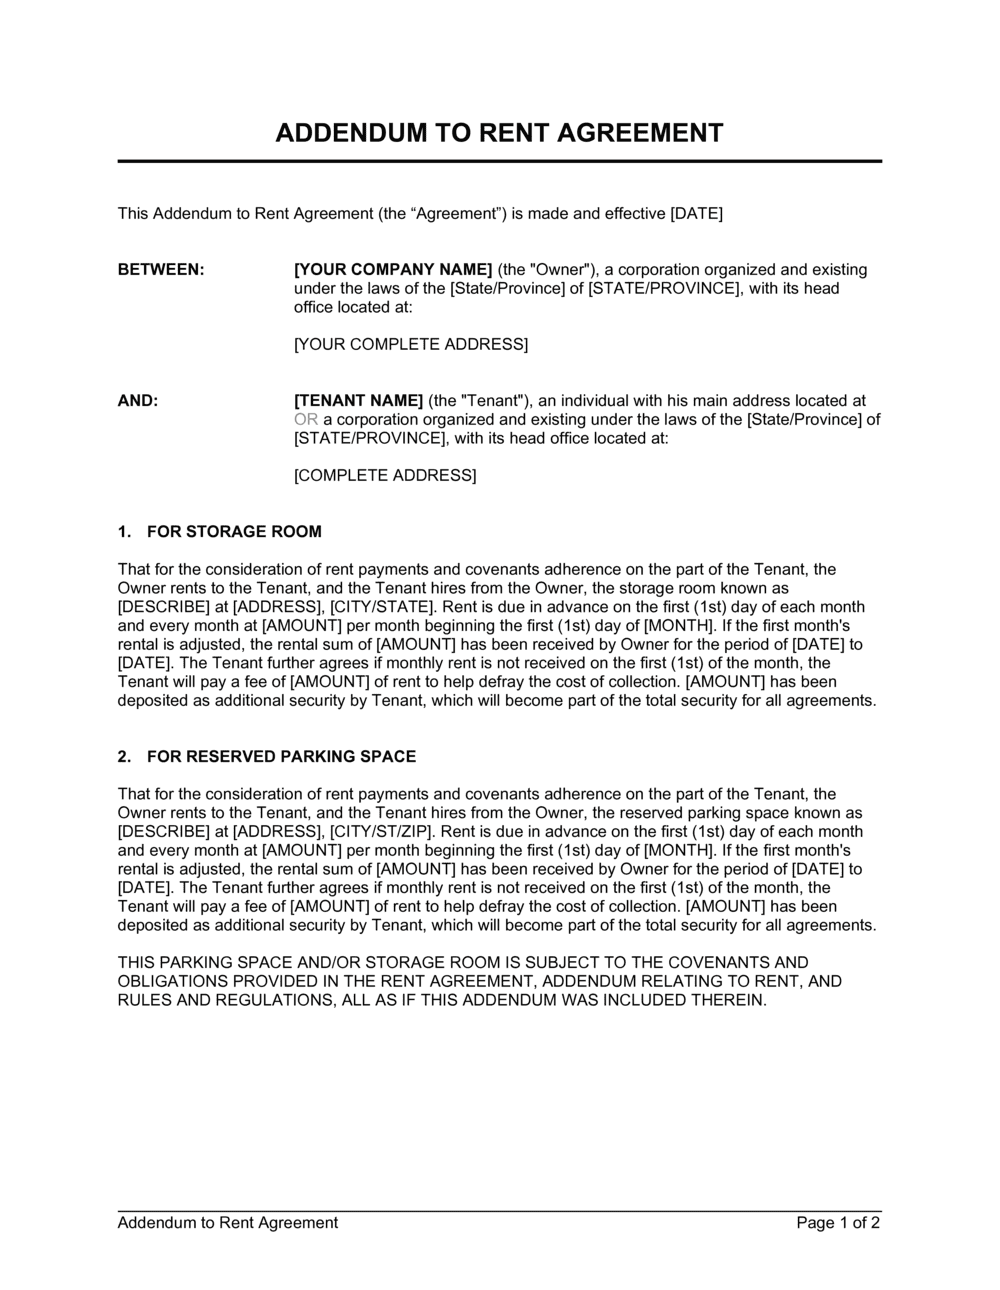 Addendum to Rent Agreement Template  by Business-in-a-Box™